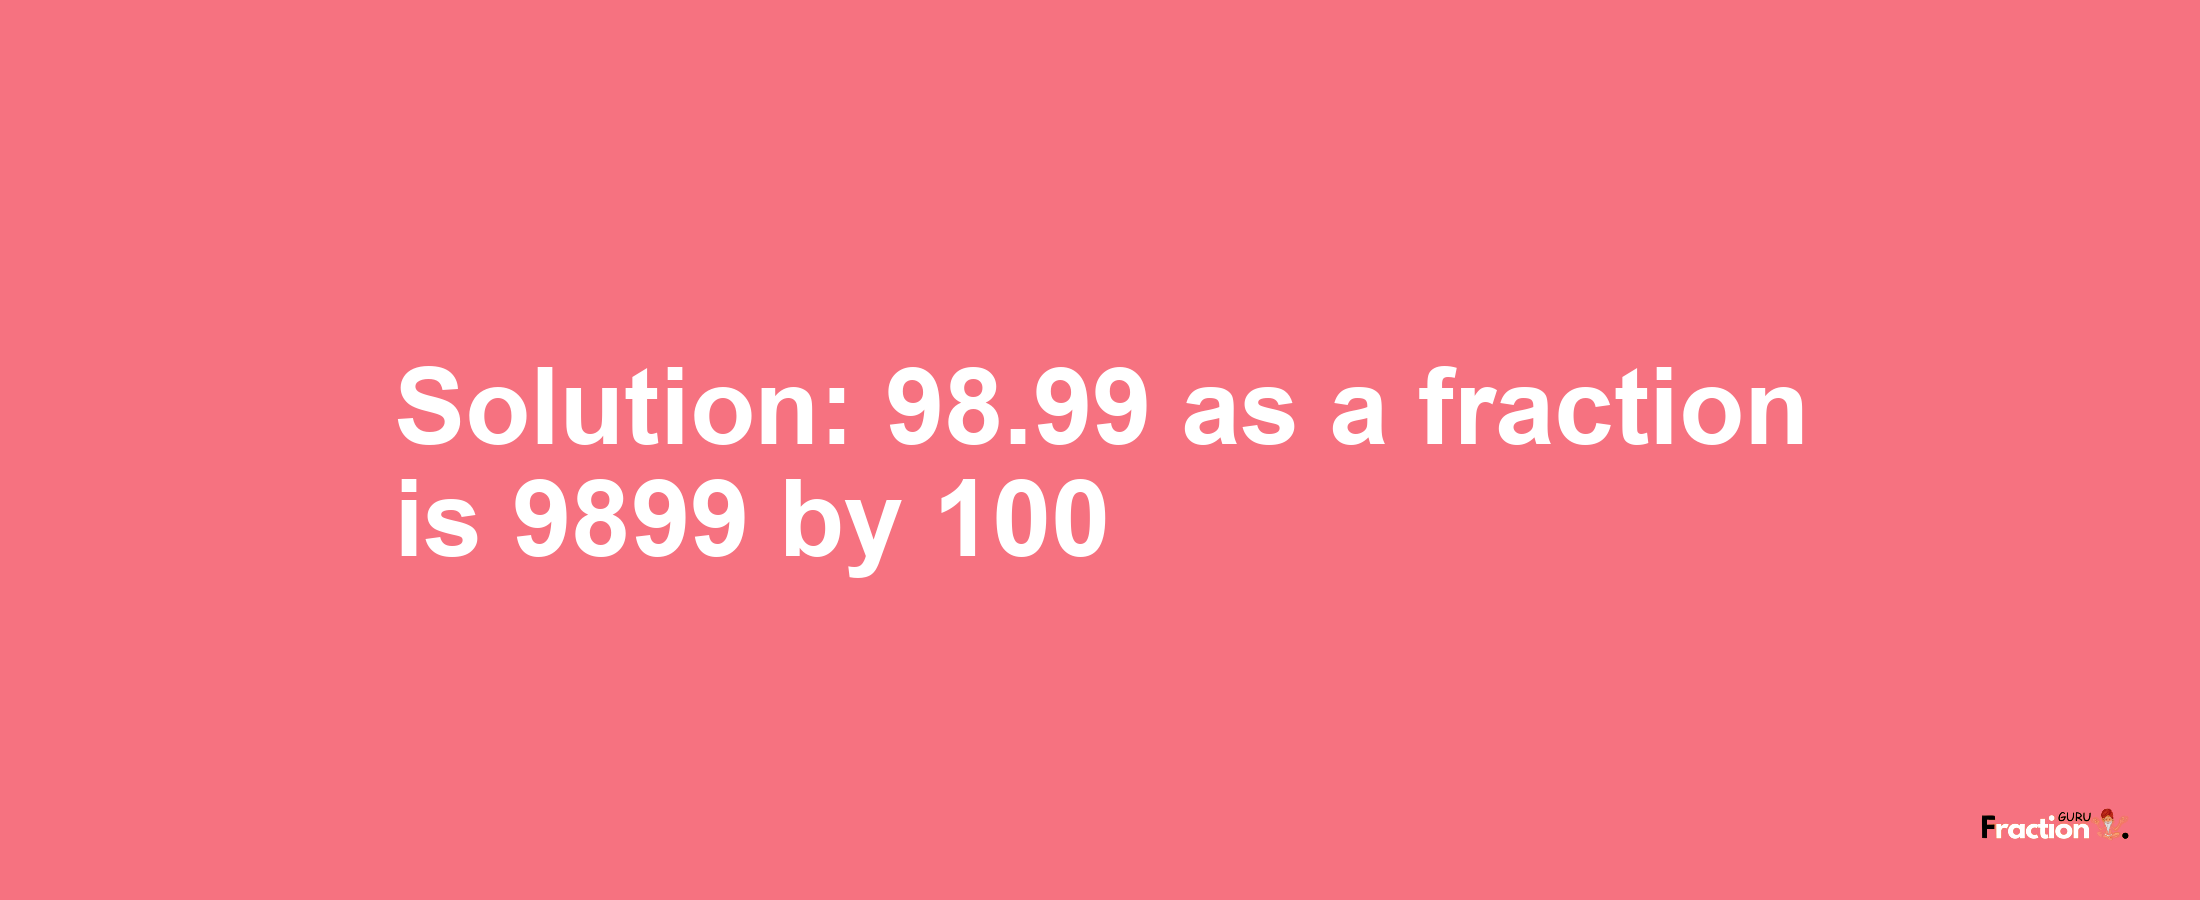 Solution:98.99 as a fraction is 9899/100